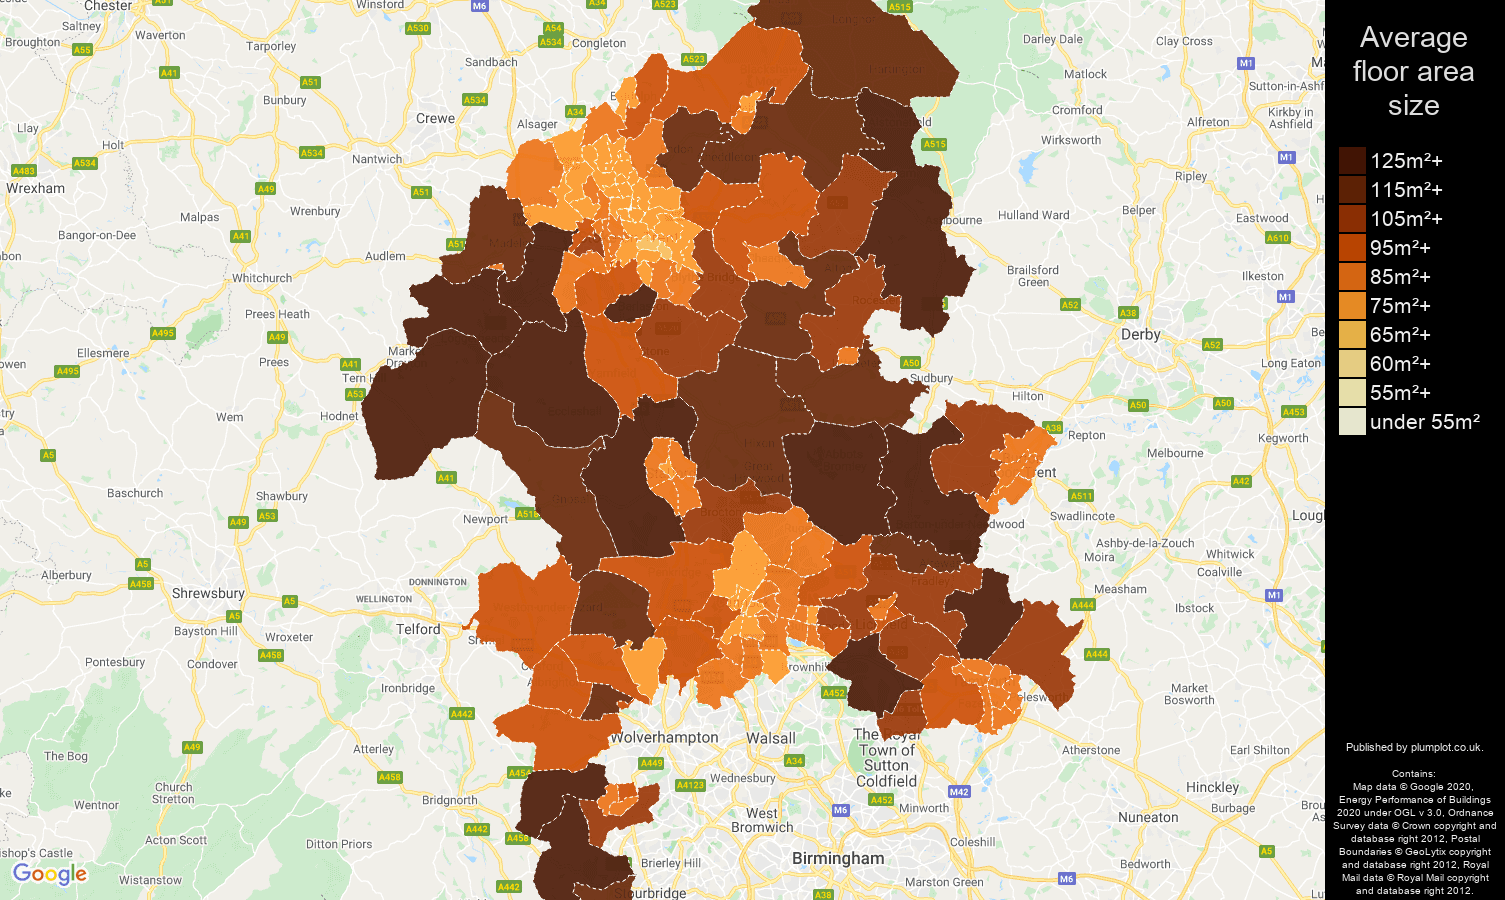 Staffordshire map of average floor area size of houses